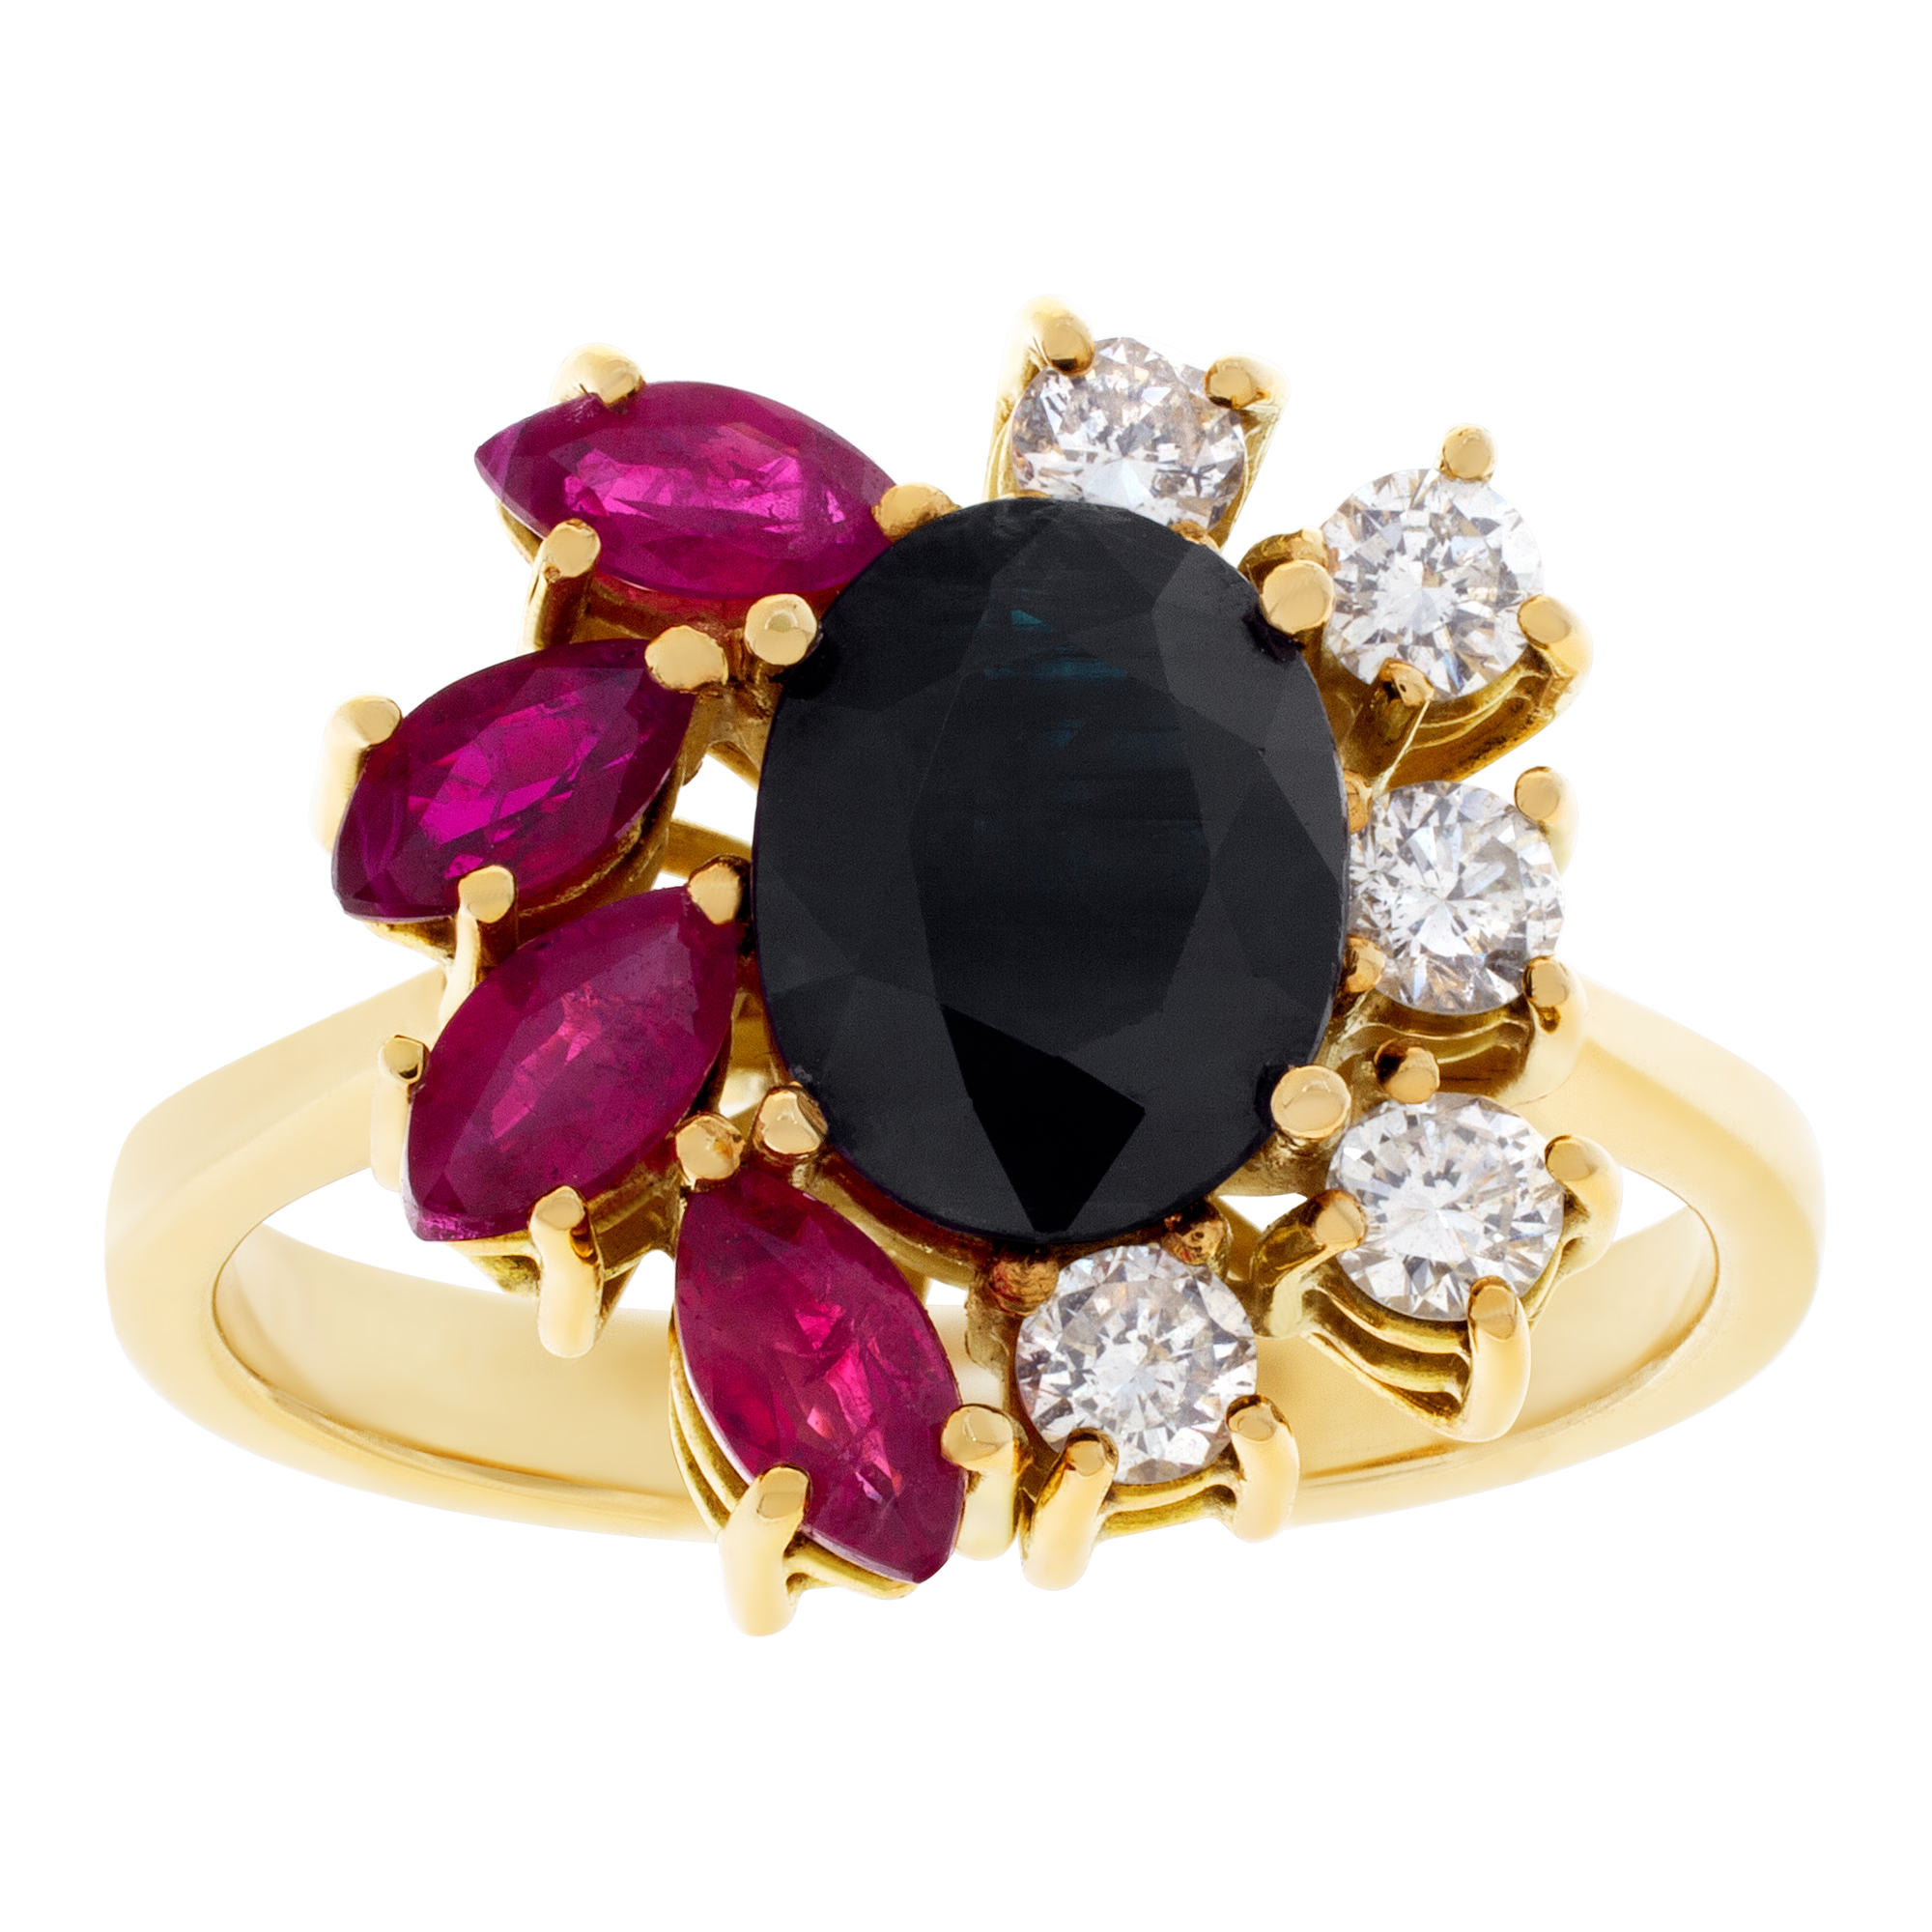 Flower style ring with rubies, sapphires and diamonds